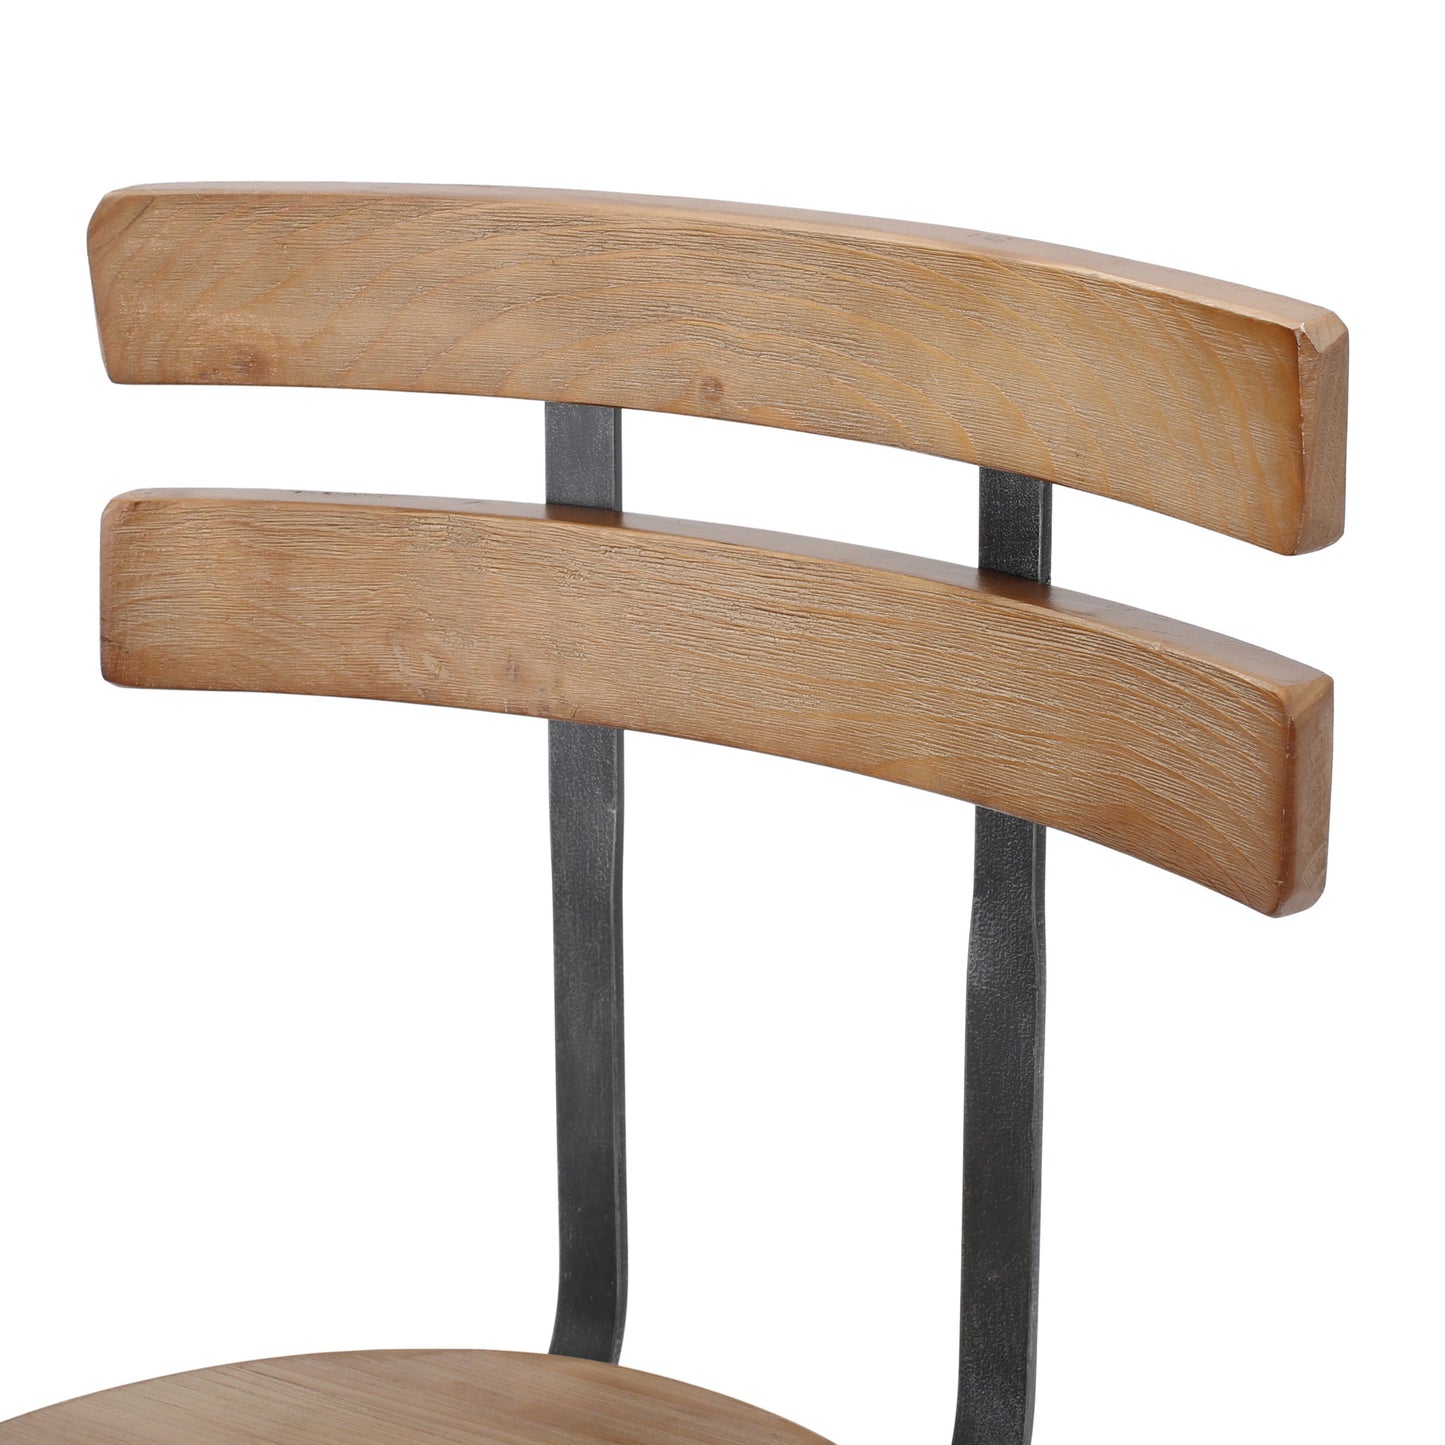 Poe Anique Finish Firwood Height Adjustable Bar Stool